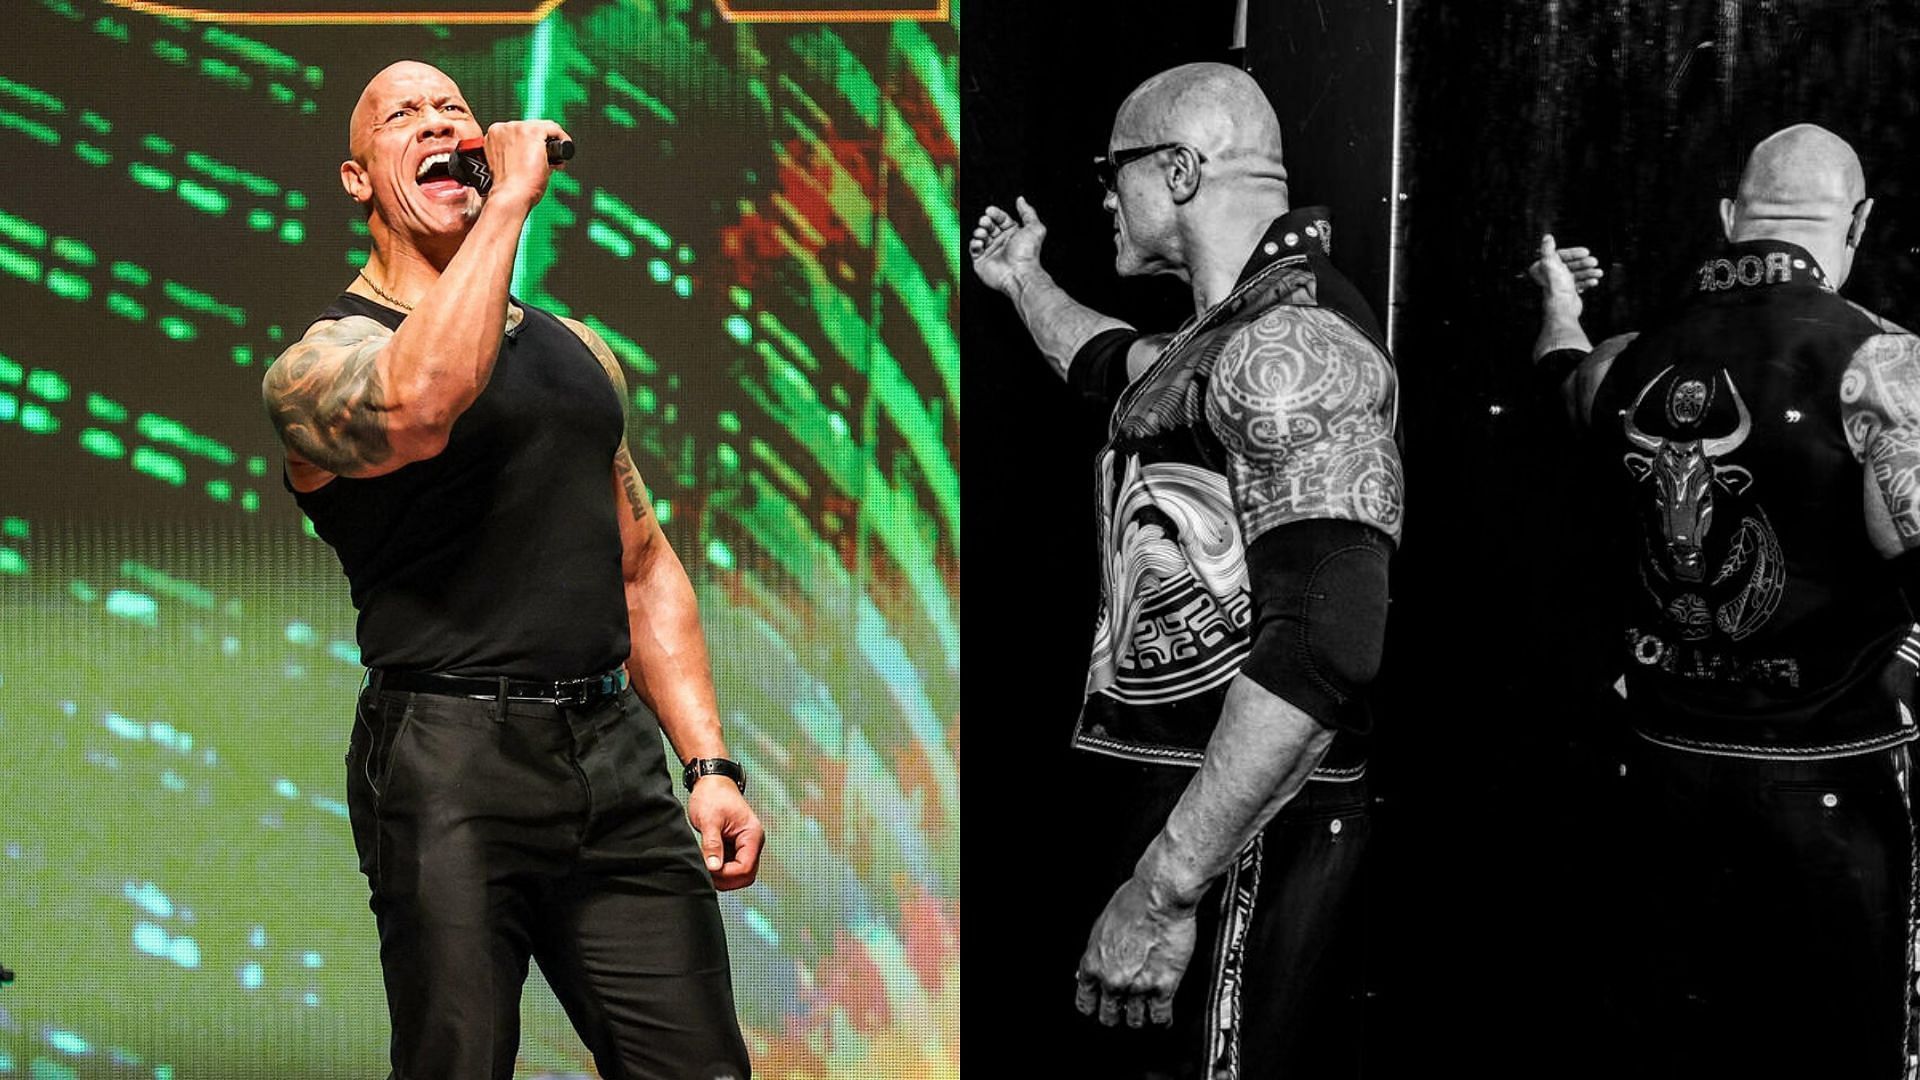 The Rock finished his latest WWE run after WrestleMania XL